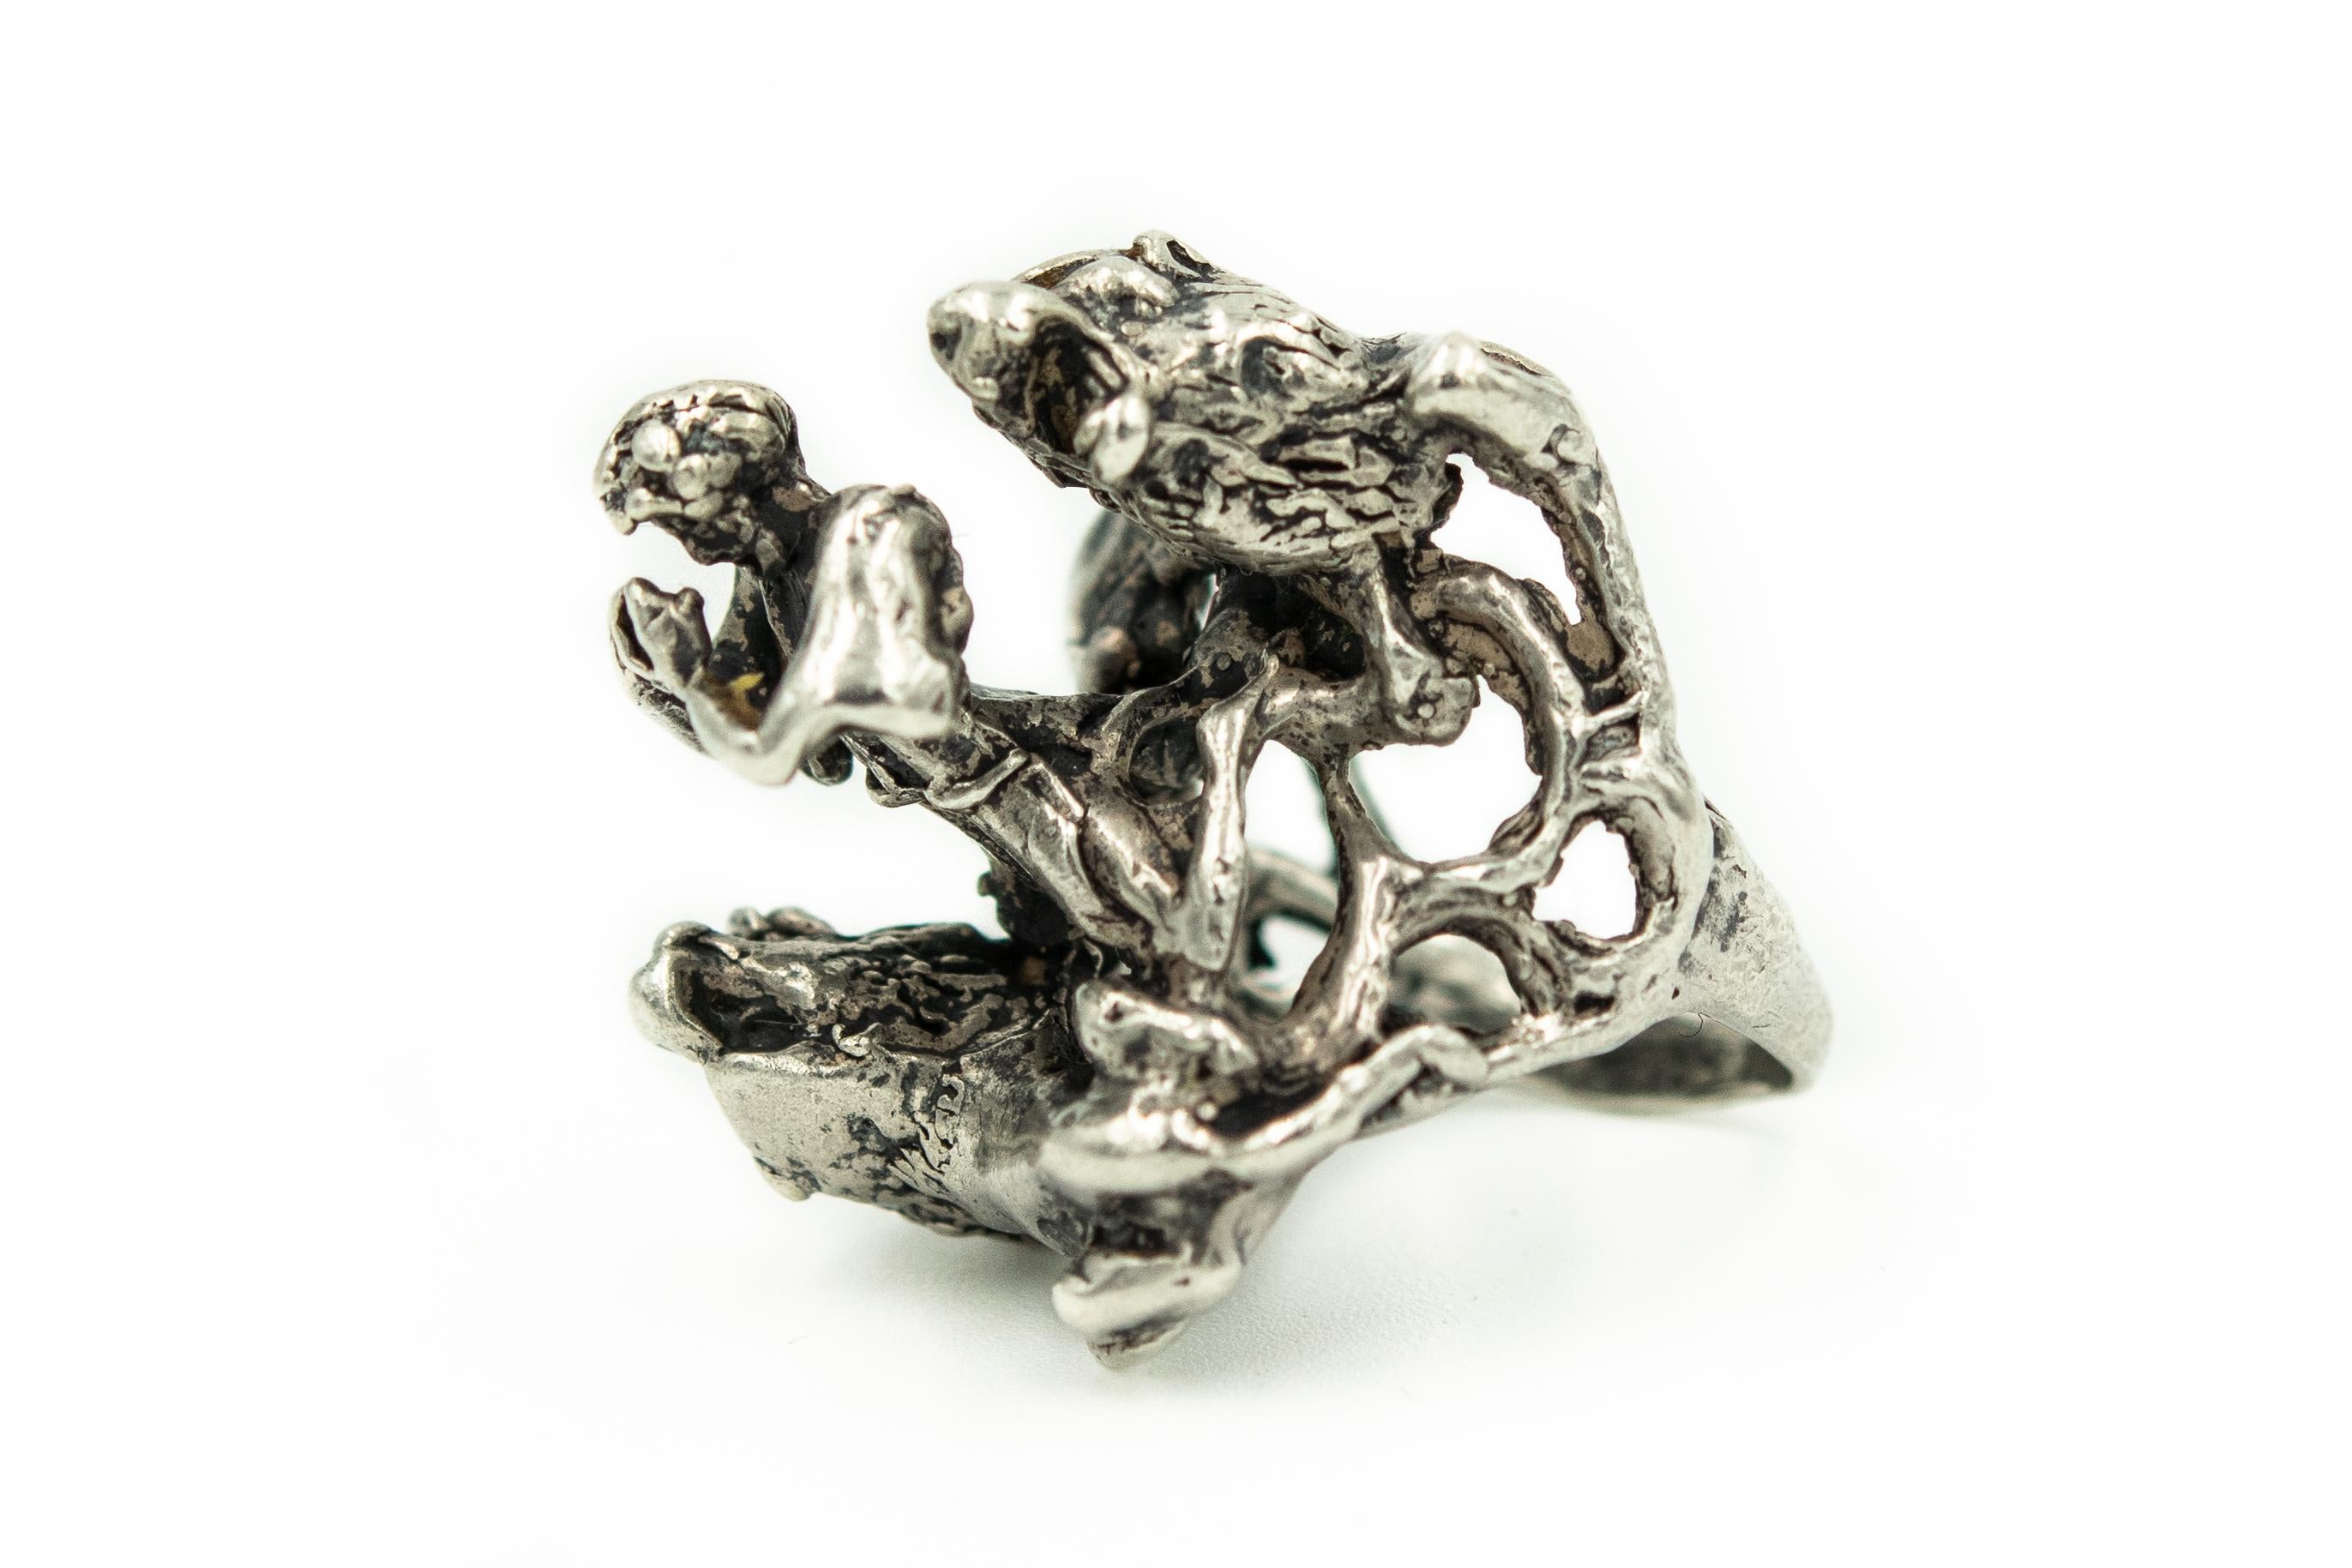 This 3D sterling silver ring depicts Jonah praying between 2 lions.   This ring belonged to a Rabbi's wife. 
It is a US size size 5.

According to Wikipedia - History of the tribe of Judah and the Lion
The Lion of Judah (Hebrew: אריה יהודה‎ Aryeh